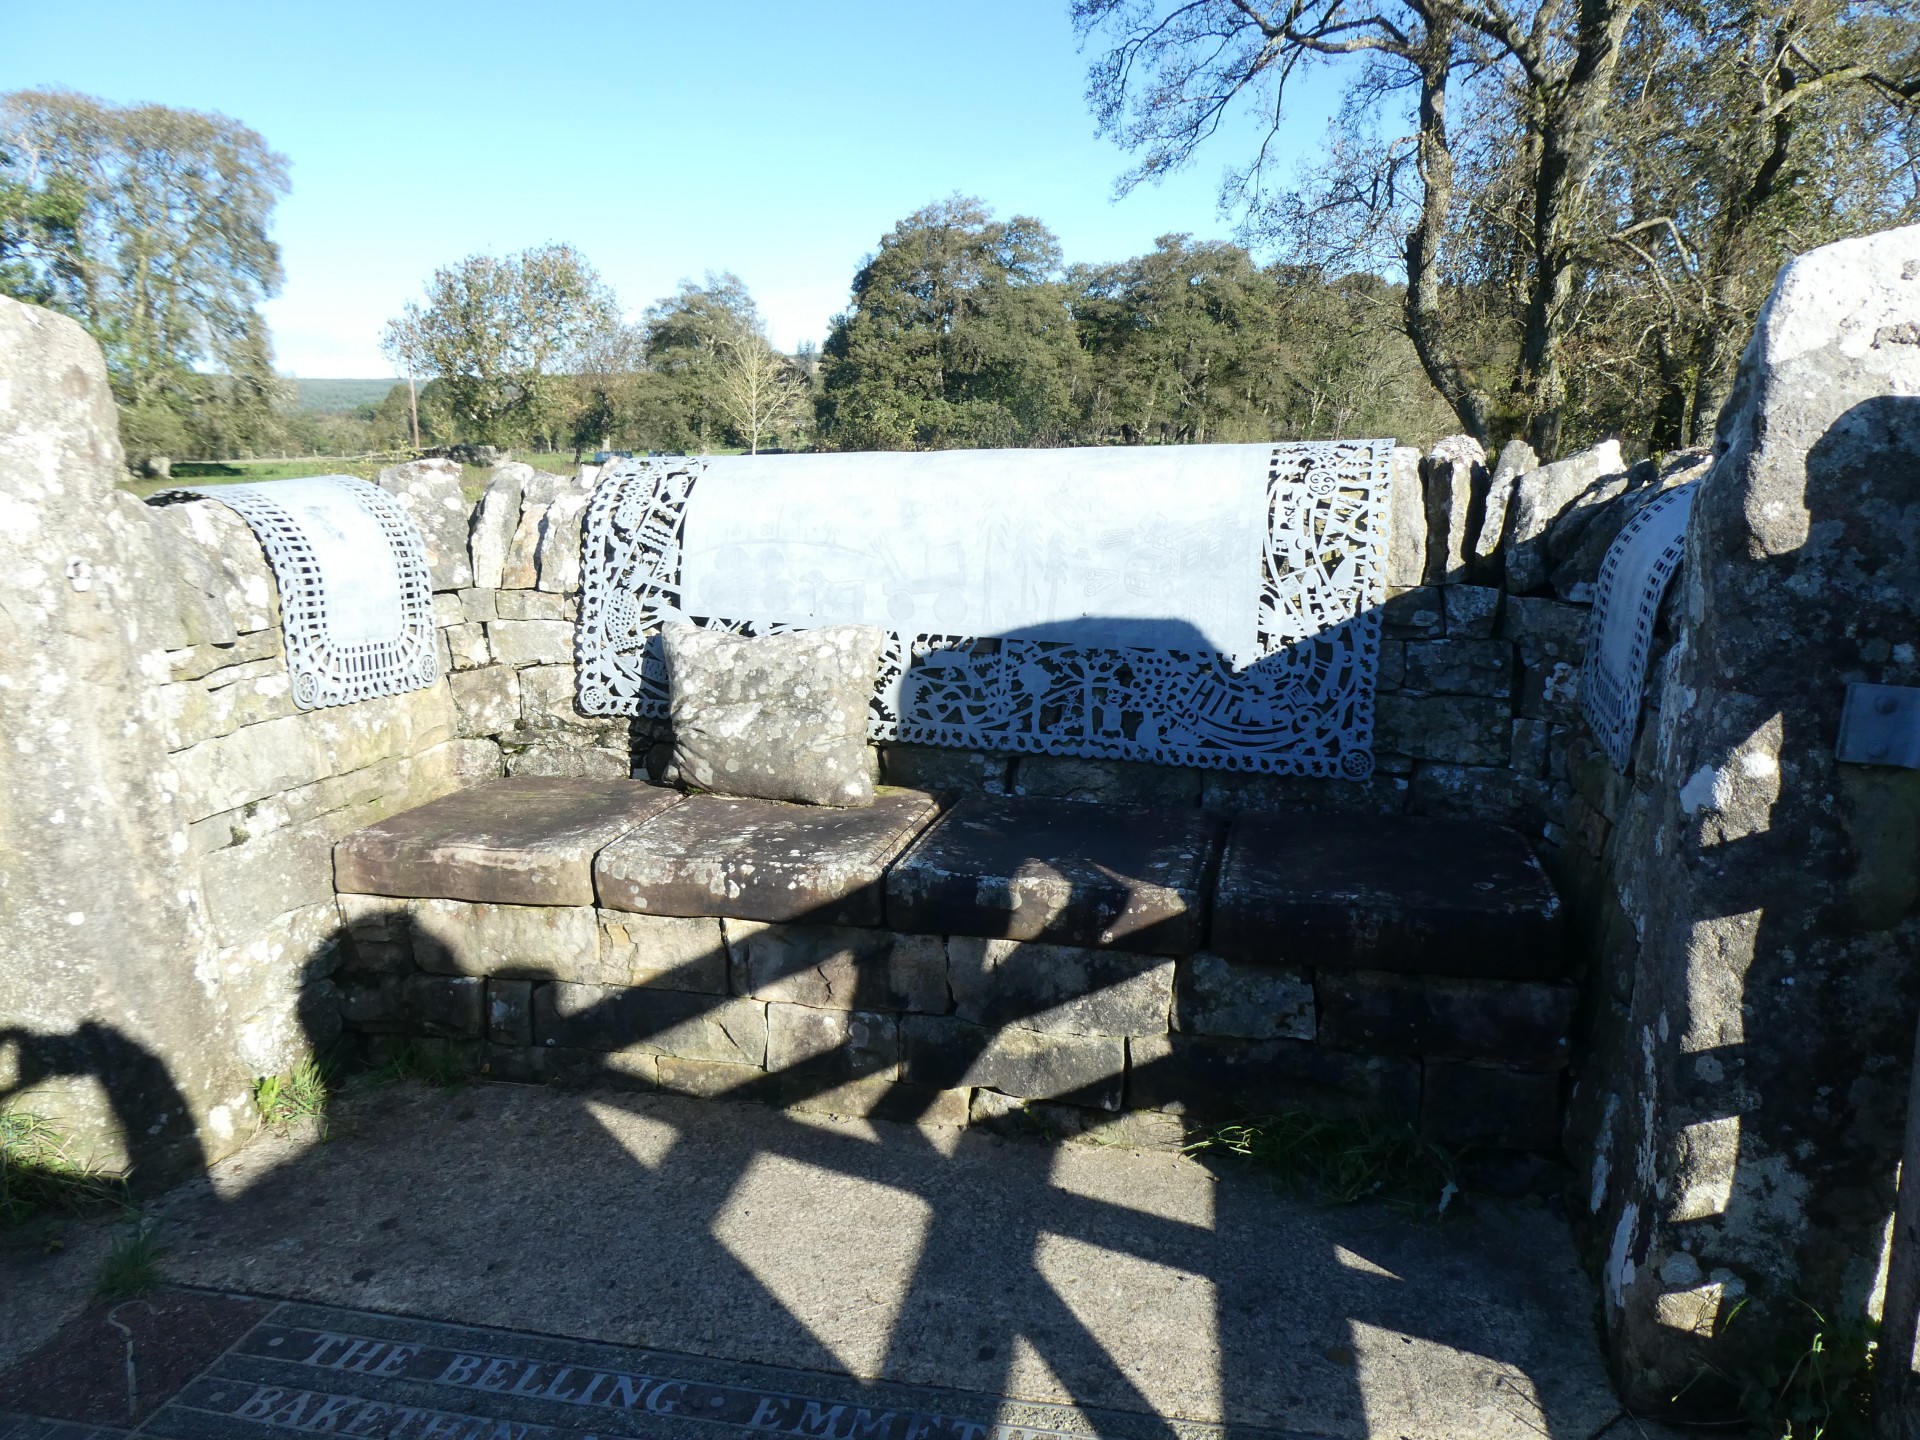 The Stell has metal seat backs over the stone seats